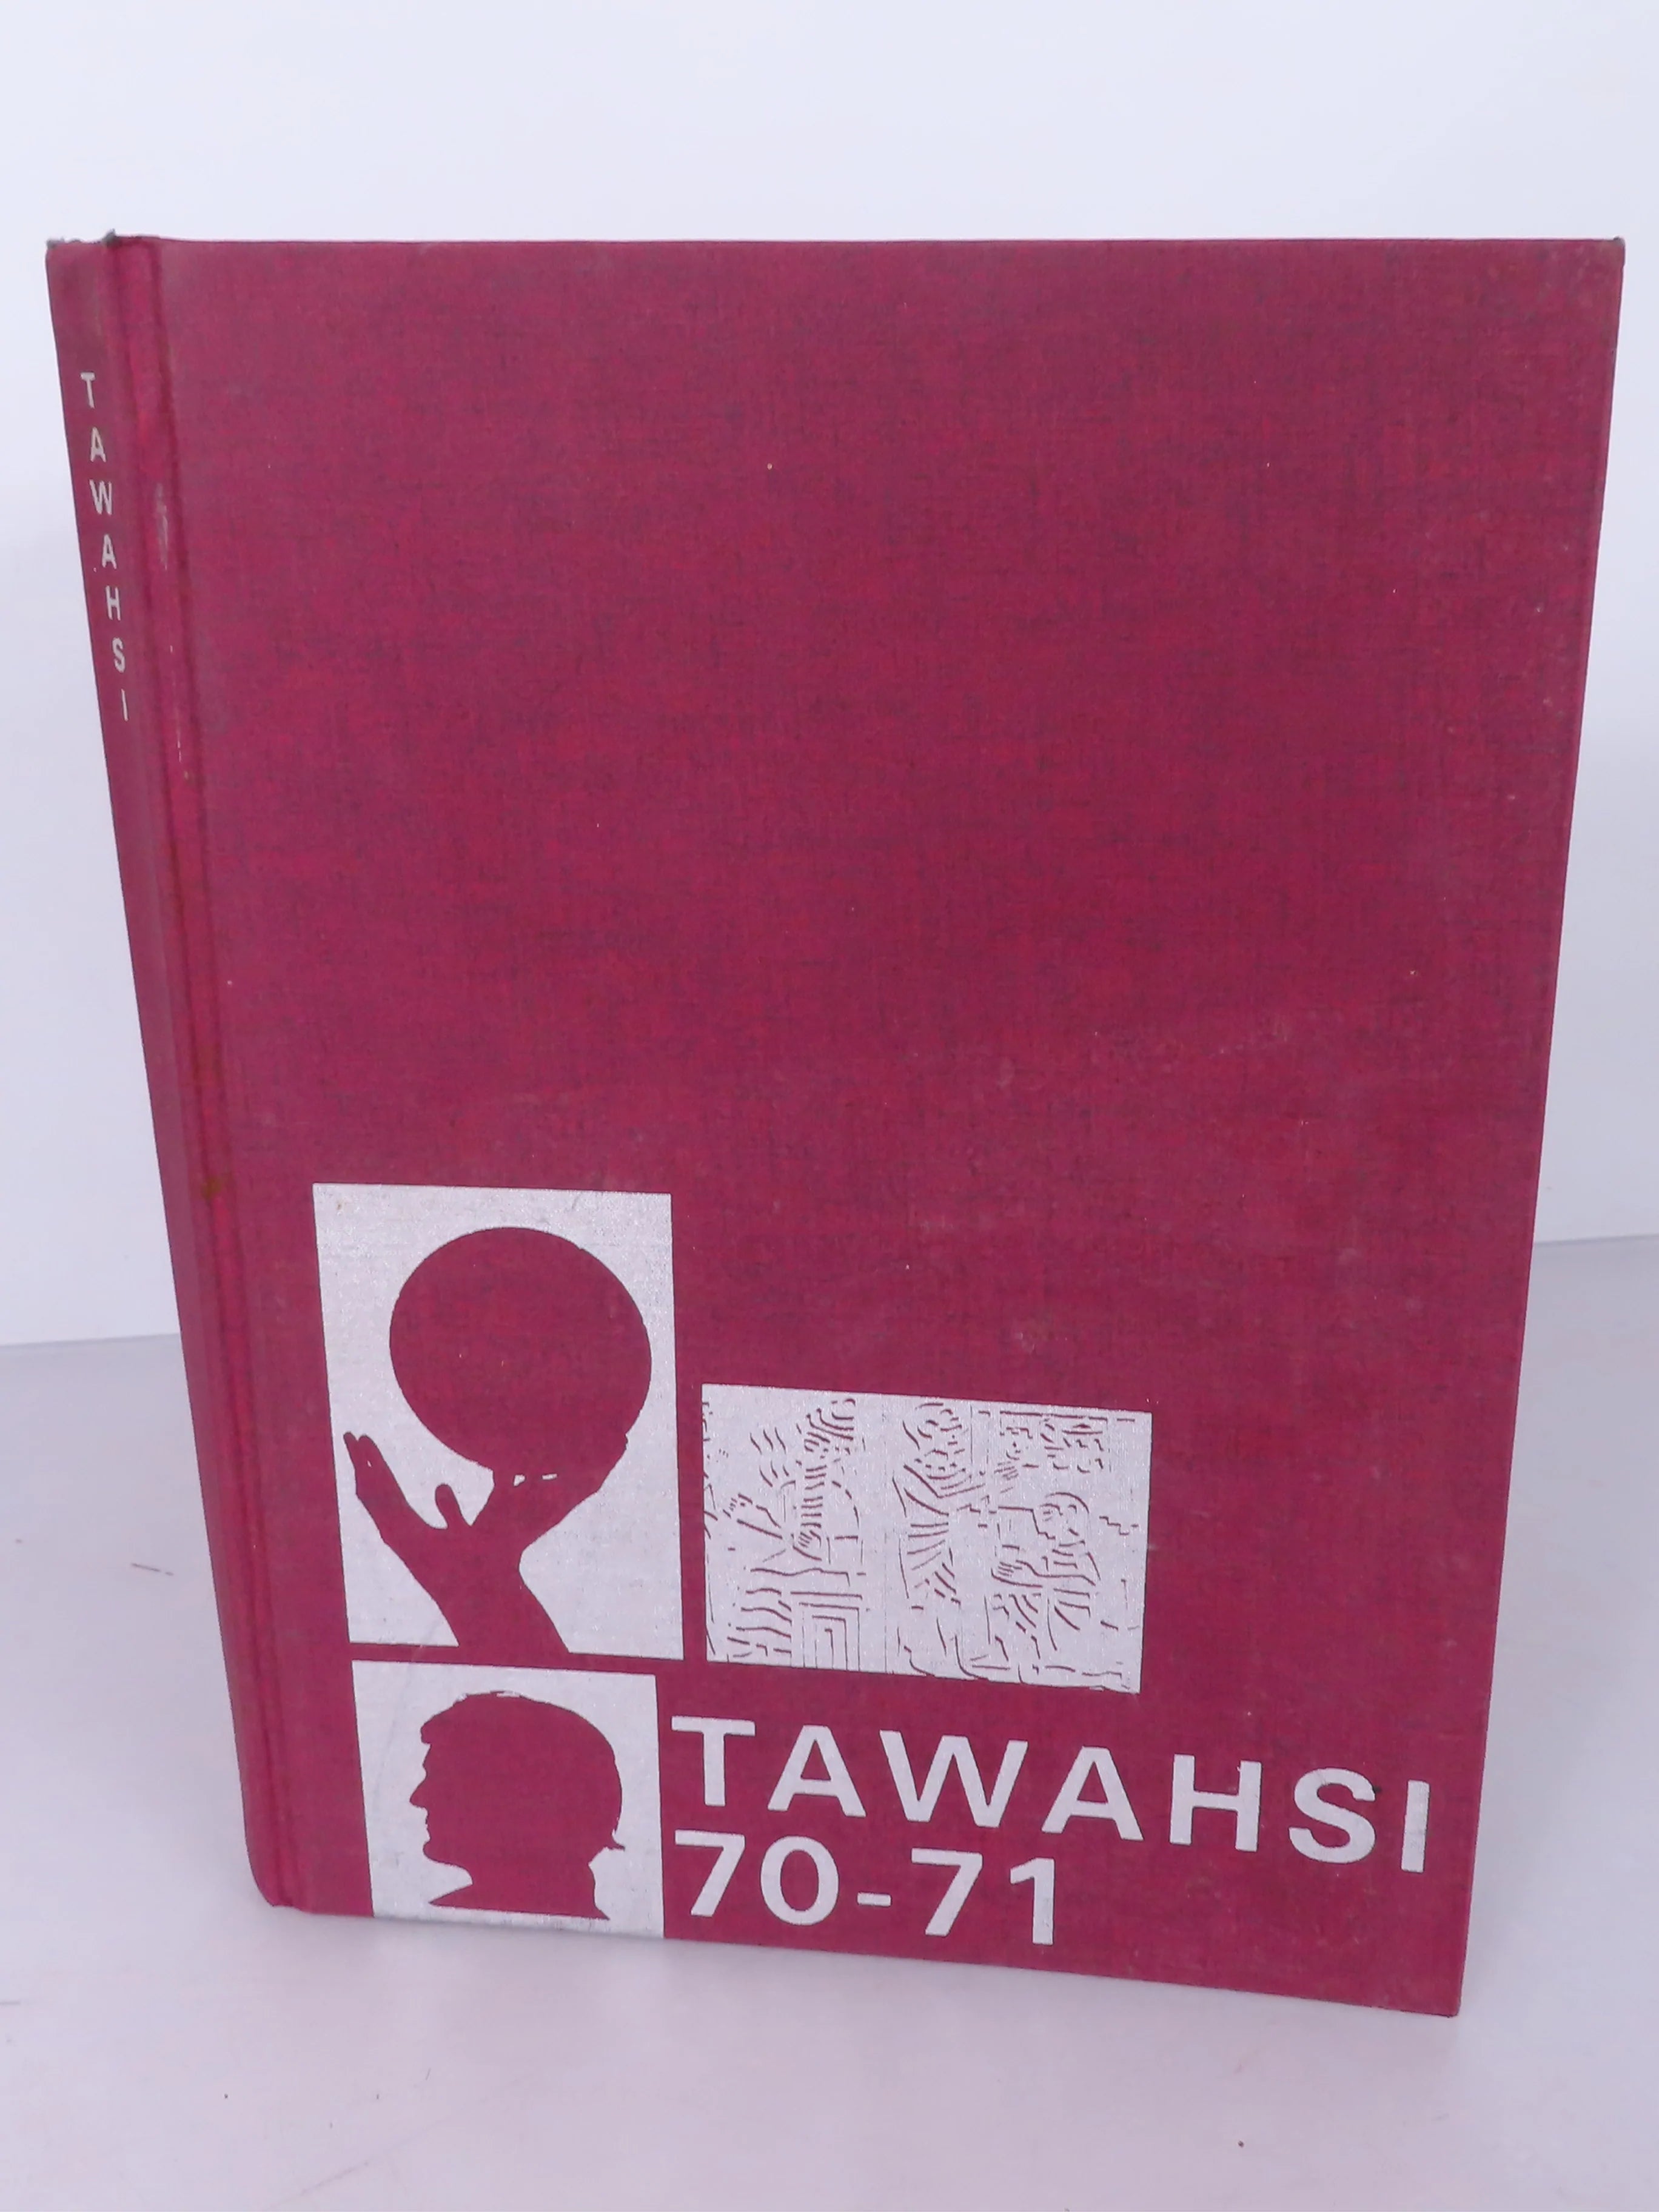 1971 Yearbook The Tawahsi of Seattle Pacific College